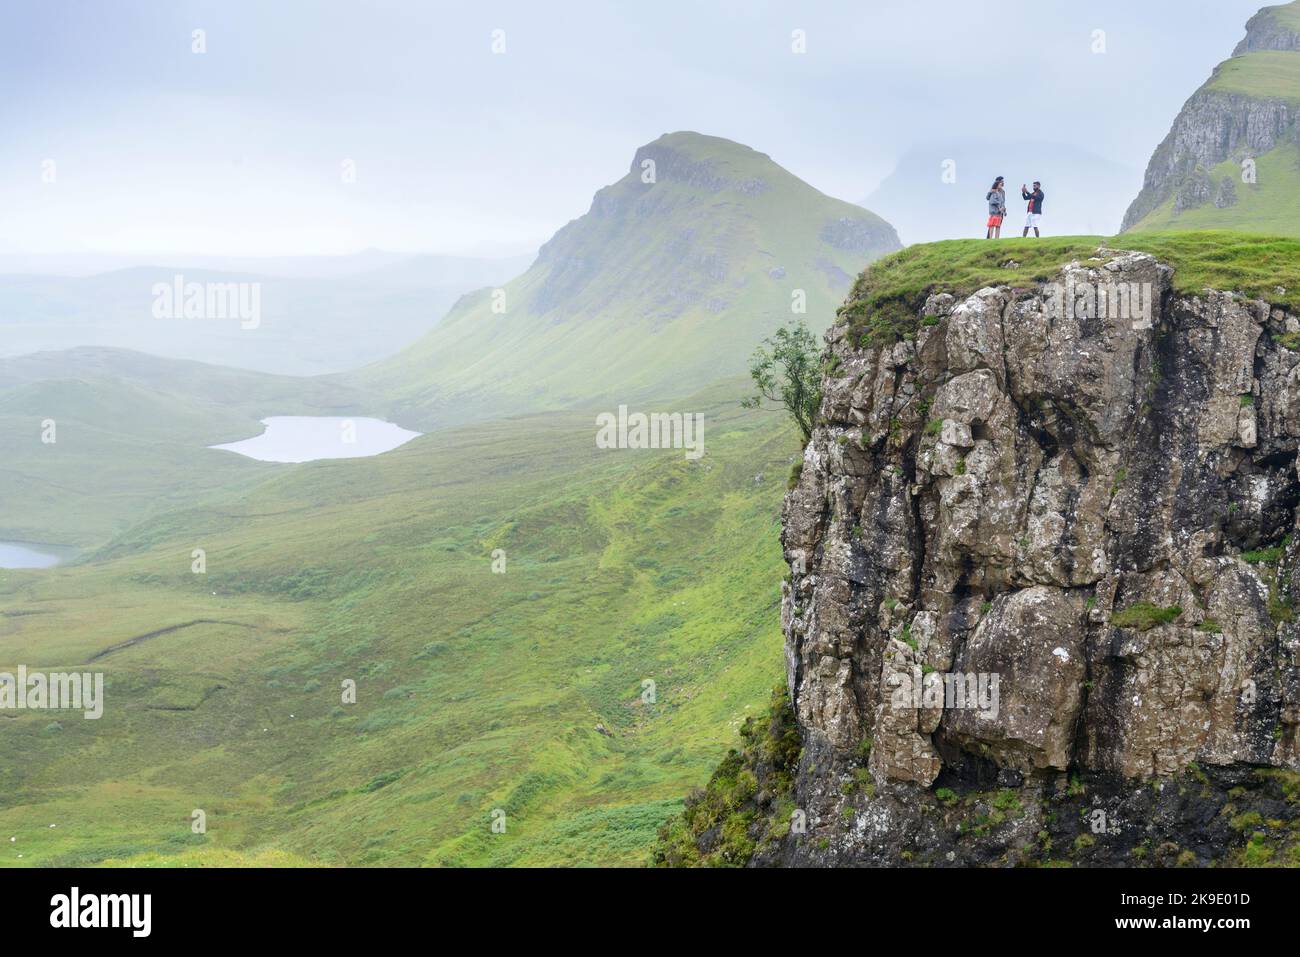 Beautiful,dramatic Scottish, Skye mountain scenery,jagged peaks,winding road and sheer cliffs, along the Quiraing hills walk,green course grass covere Stock Photo